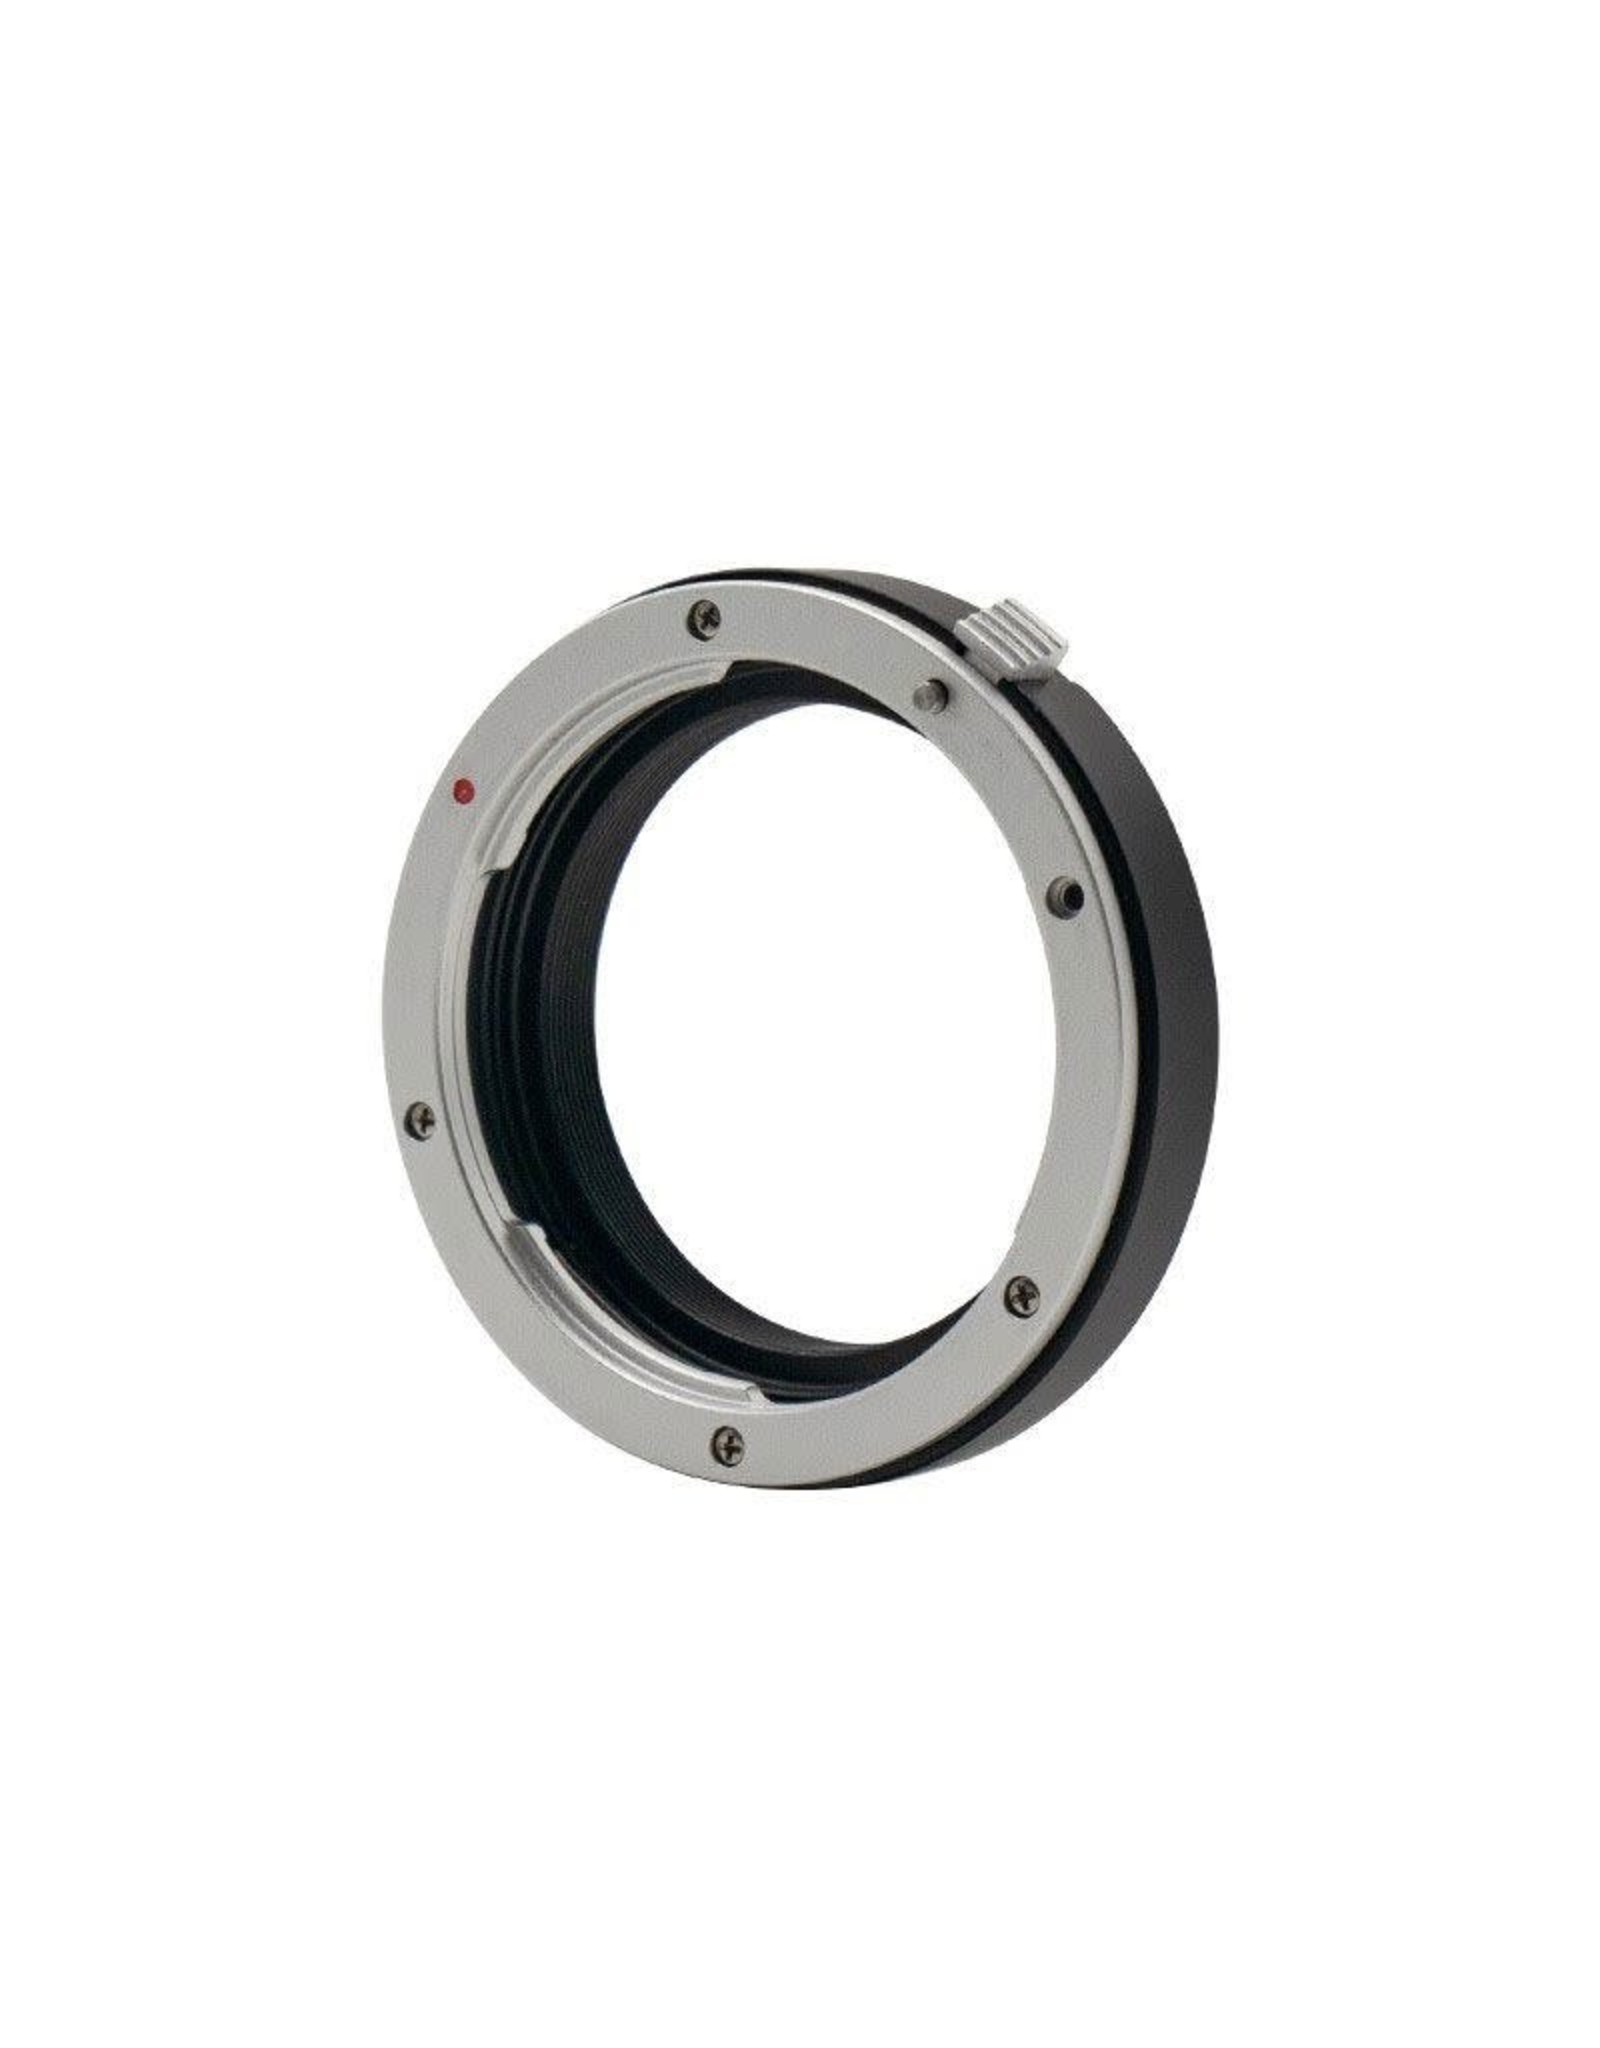 ZWO ZWO EOS Lens Adapter for 2“ EFW Filter Wheel